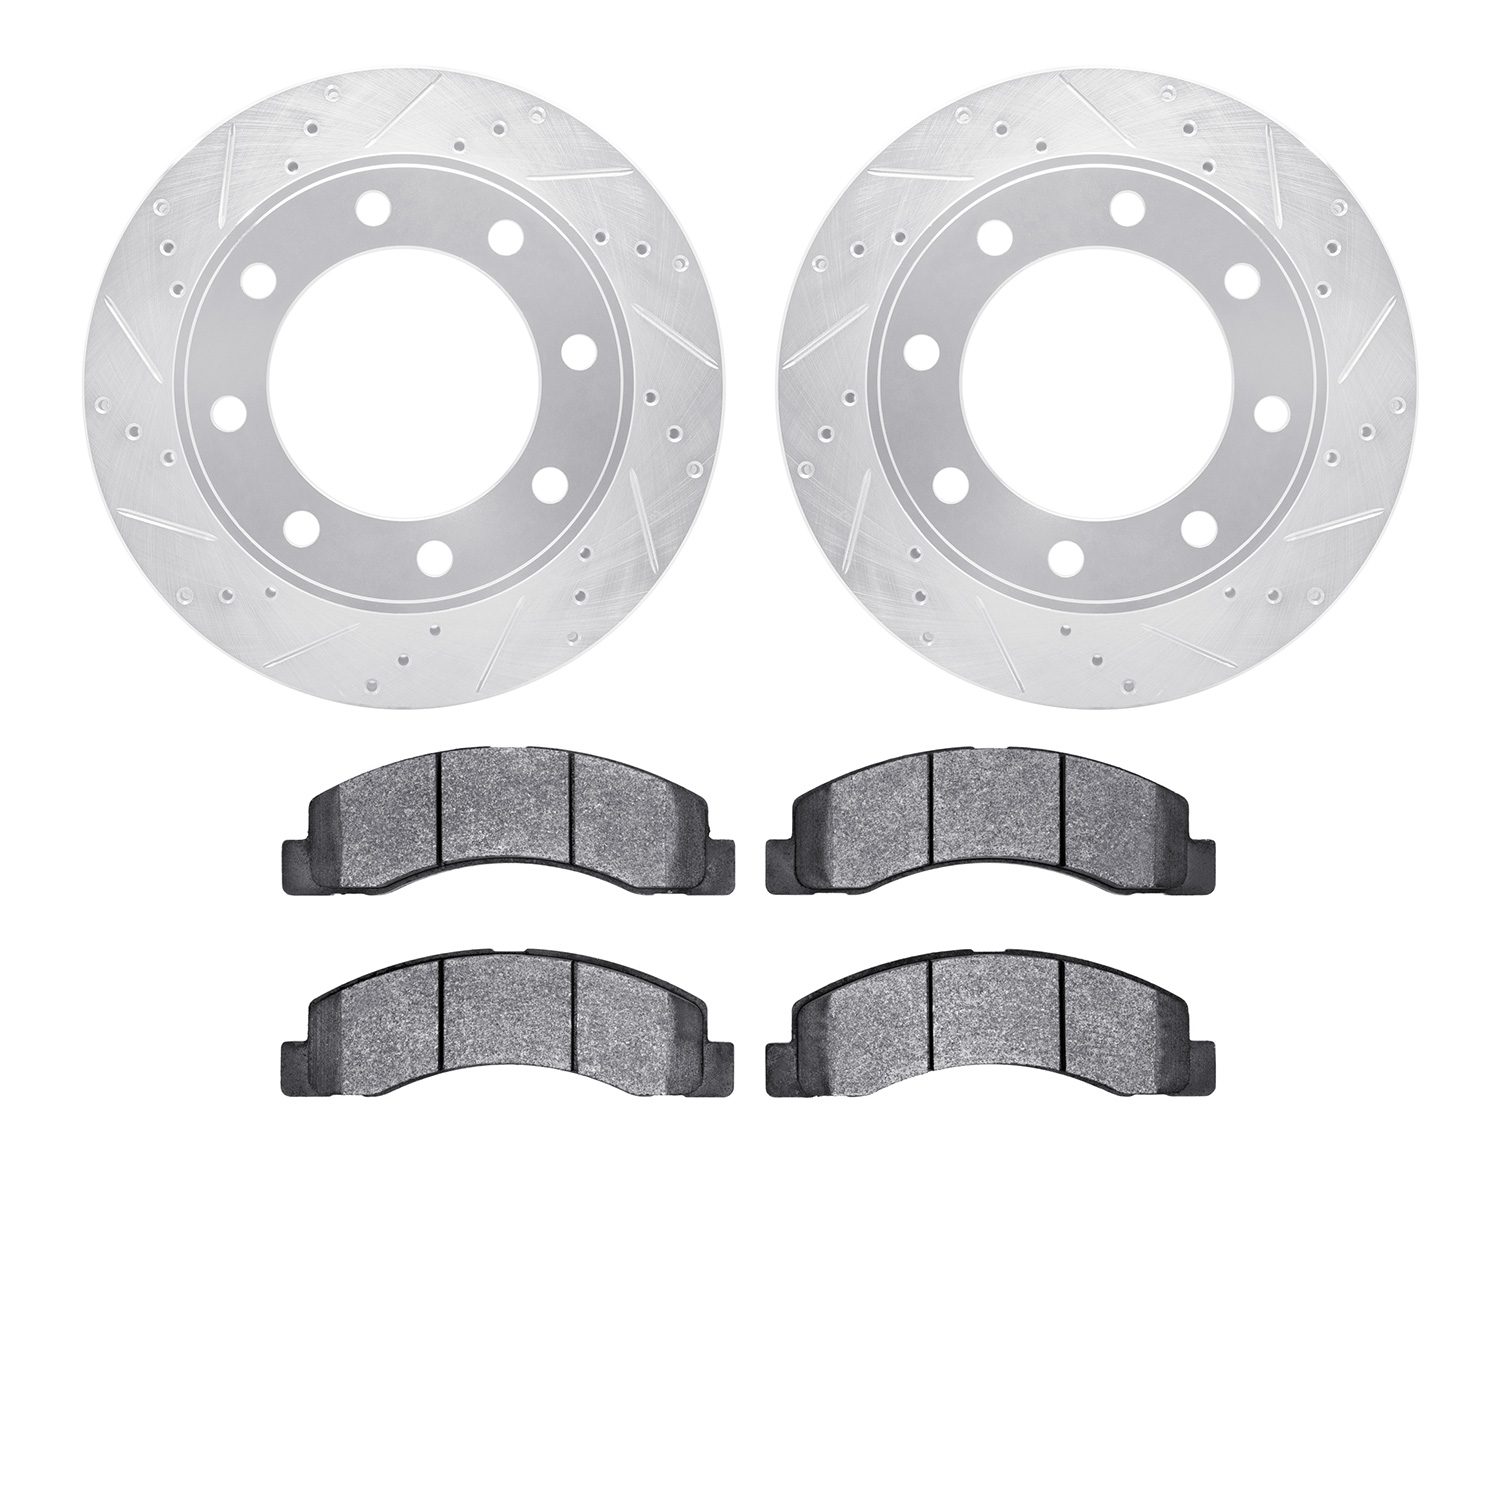 7402-54061 Drilled/Slotted Brake Rotors with Ultimate-Duty Brake Pads Kit [Silver], 1999-2005 Ford/Lincoln/Mercury/Mazda, Positi